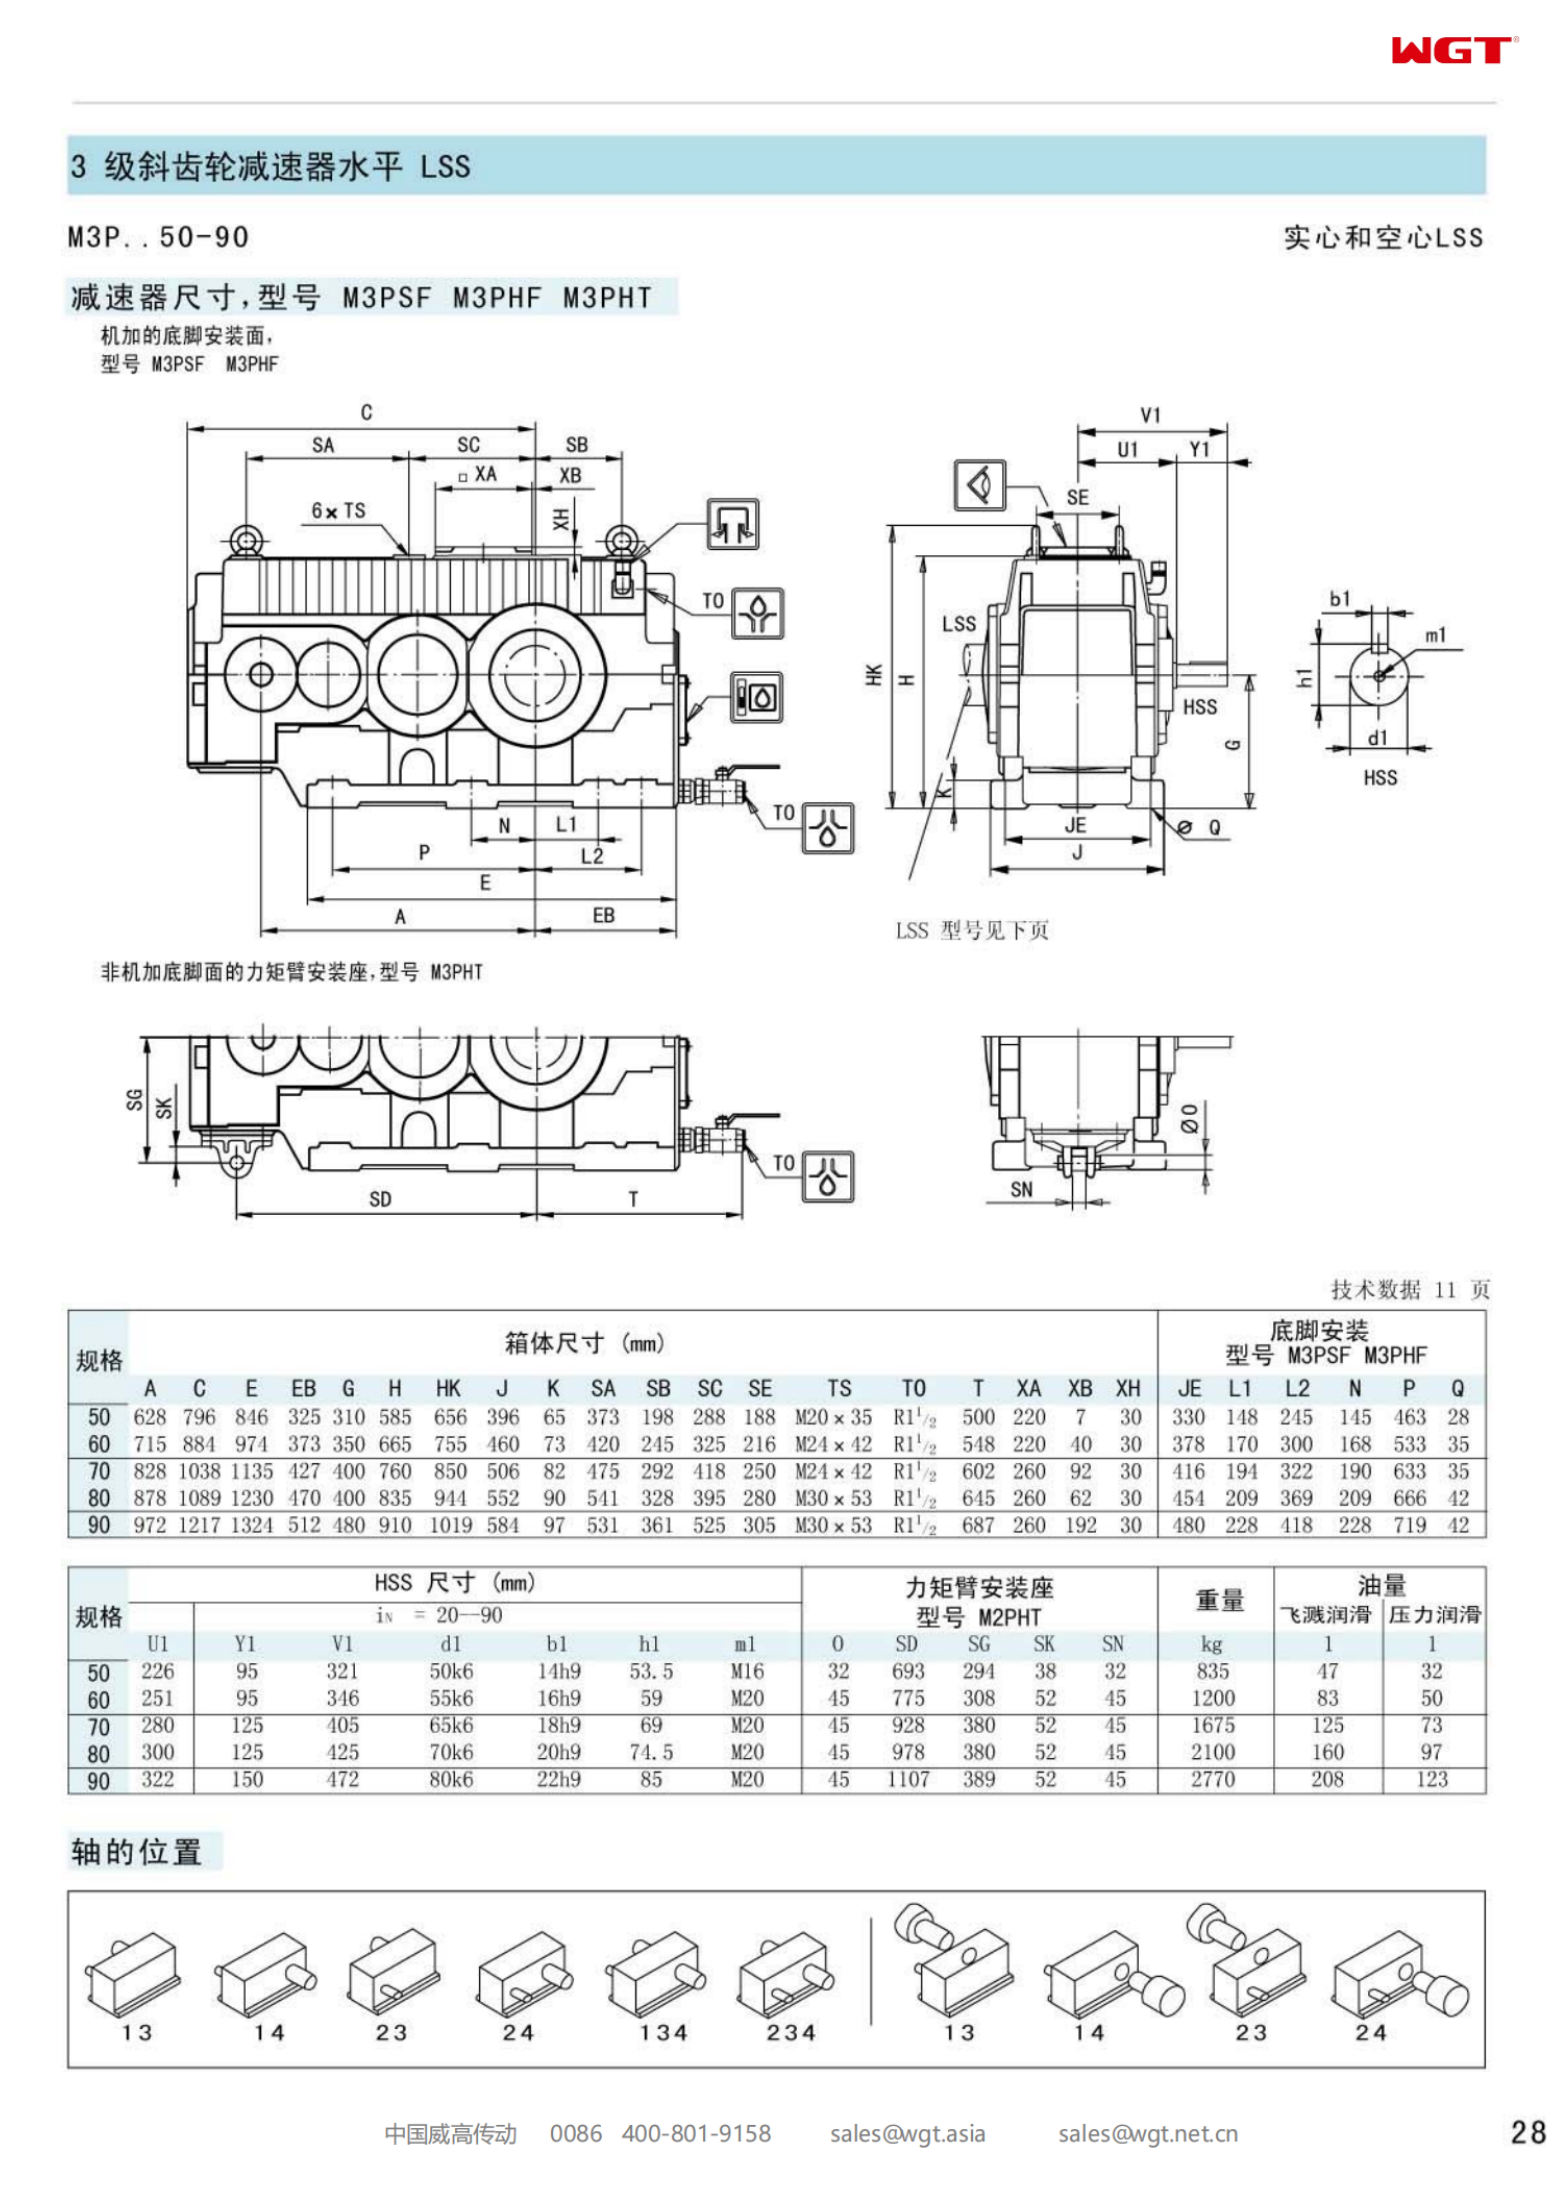 M3PSF90 Replace_SEW_M_Series Gearbox